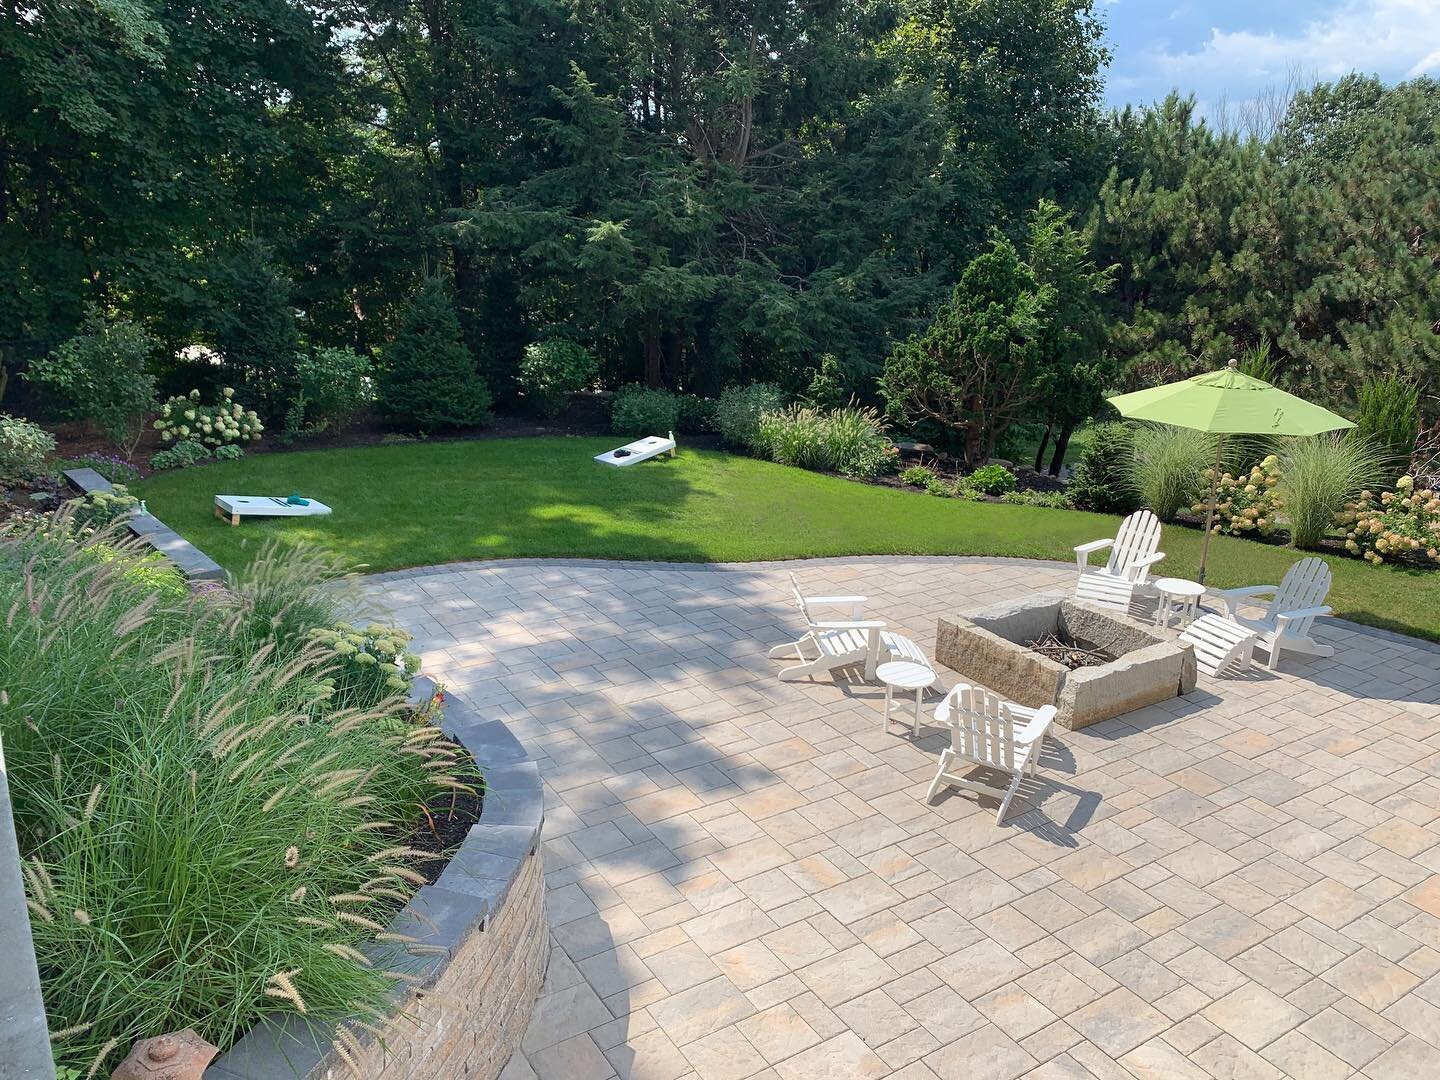 There is always a story behind our work! 

What started as a pool decking and planting project ended in this beautiful patio, firepit and lawn transformation.

Upon digging our team discovered the wood framing of the pool had rotted and was getting r